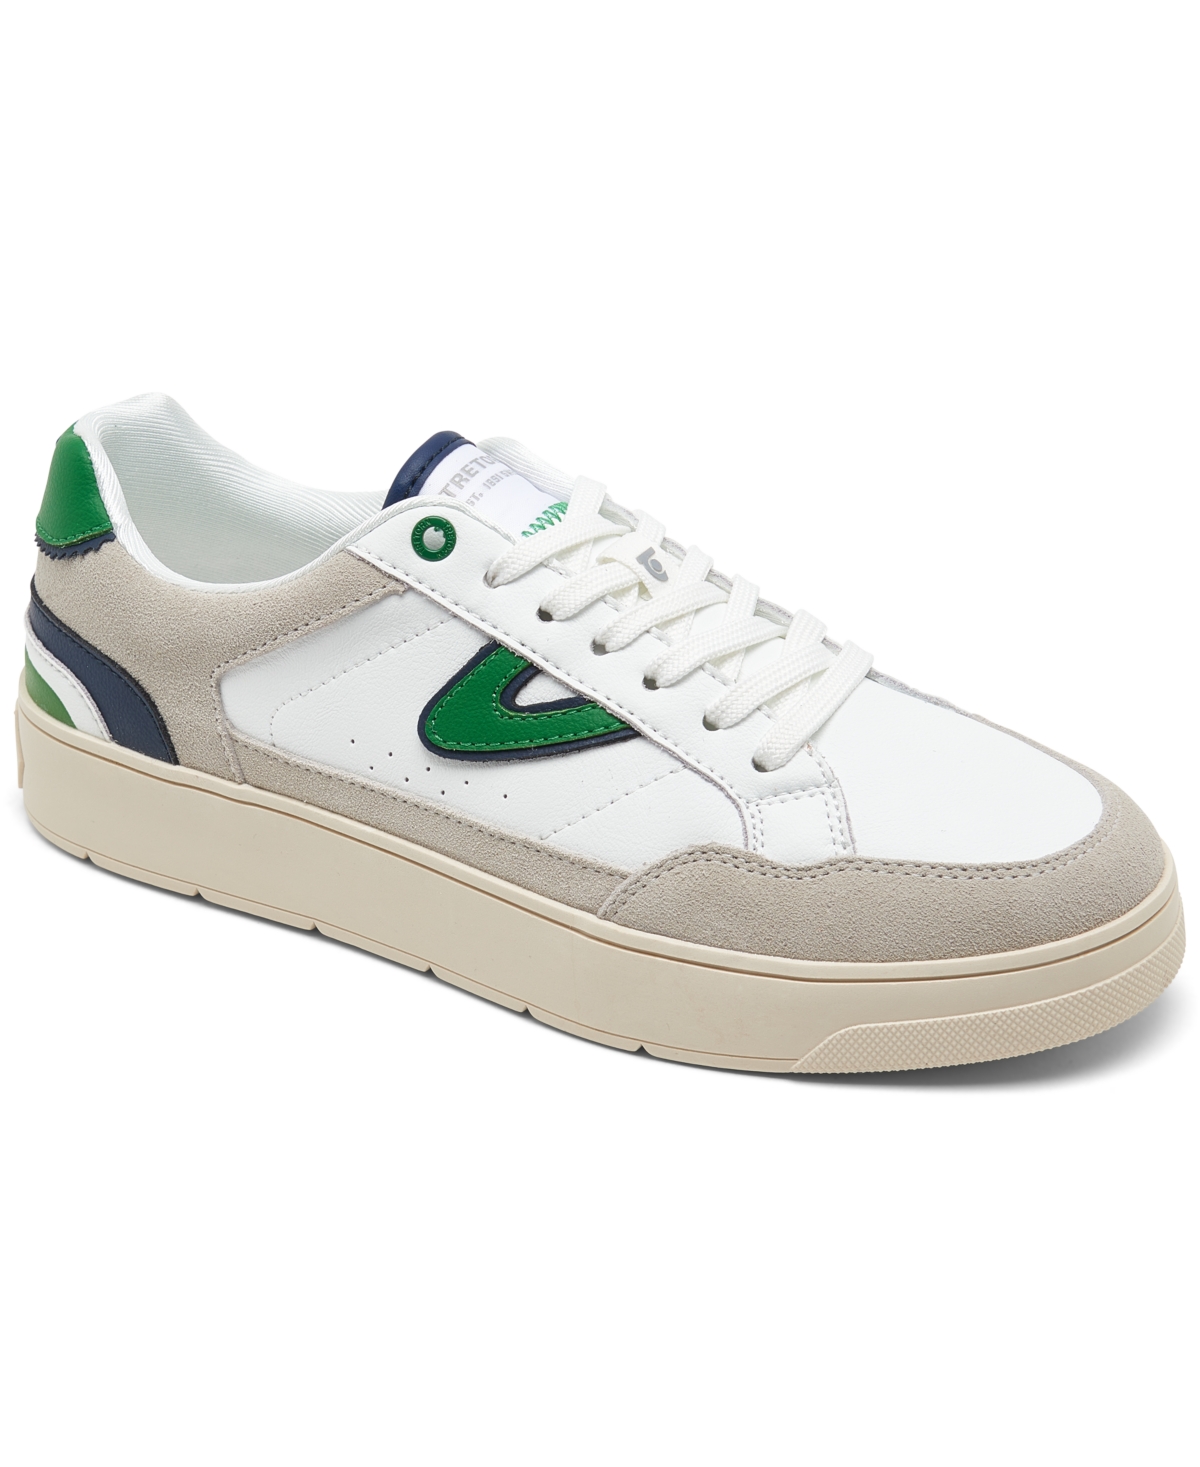 Women's Harlow Elite Casual Sneakers from Finish Line - WHITE/GREEN